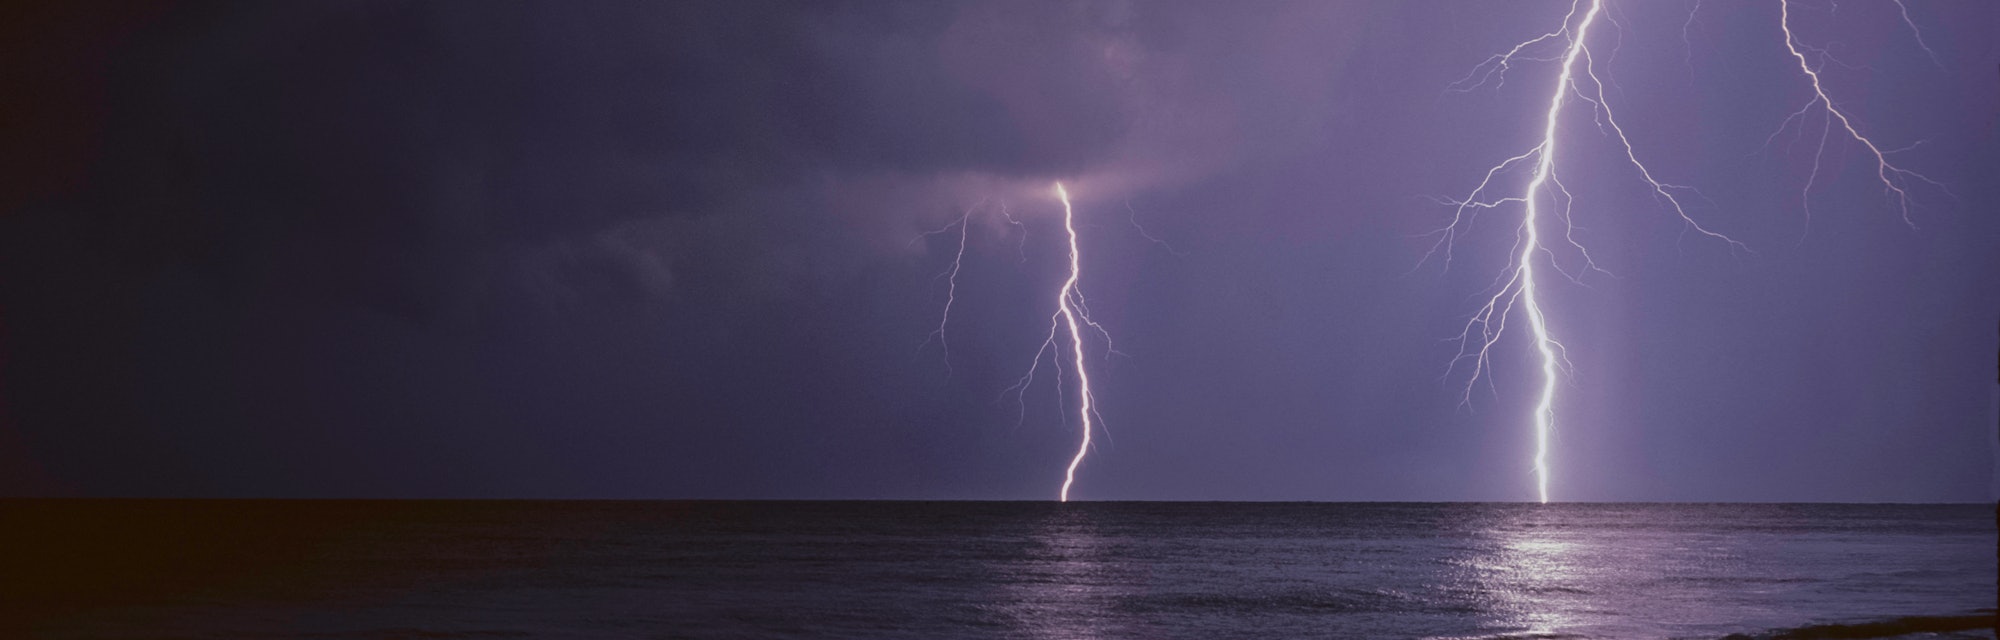 Gulf of Mexico lightning storm off shore from the beach.